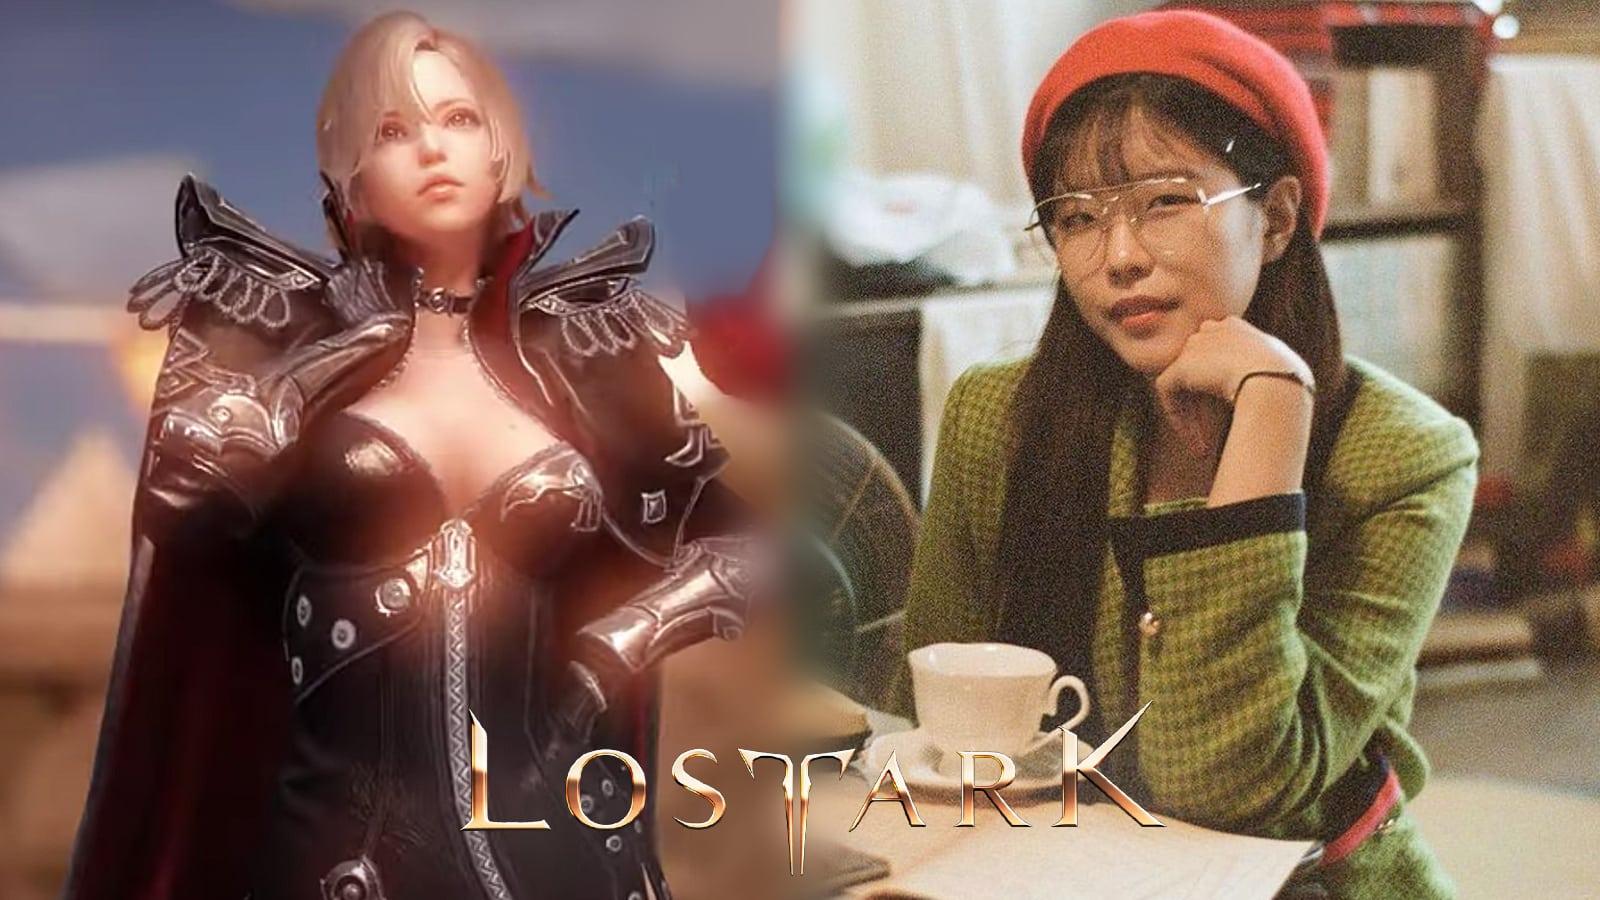 Lost ark cosplay